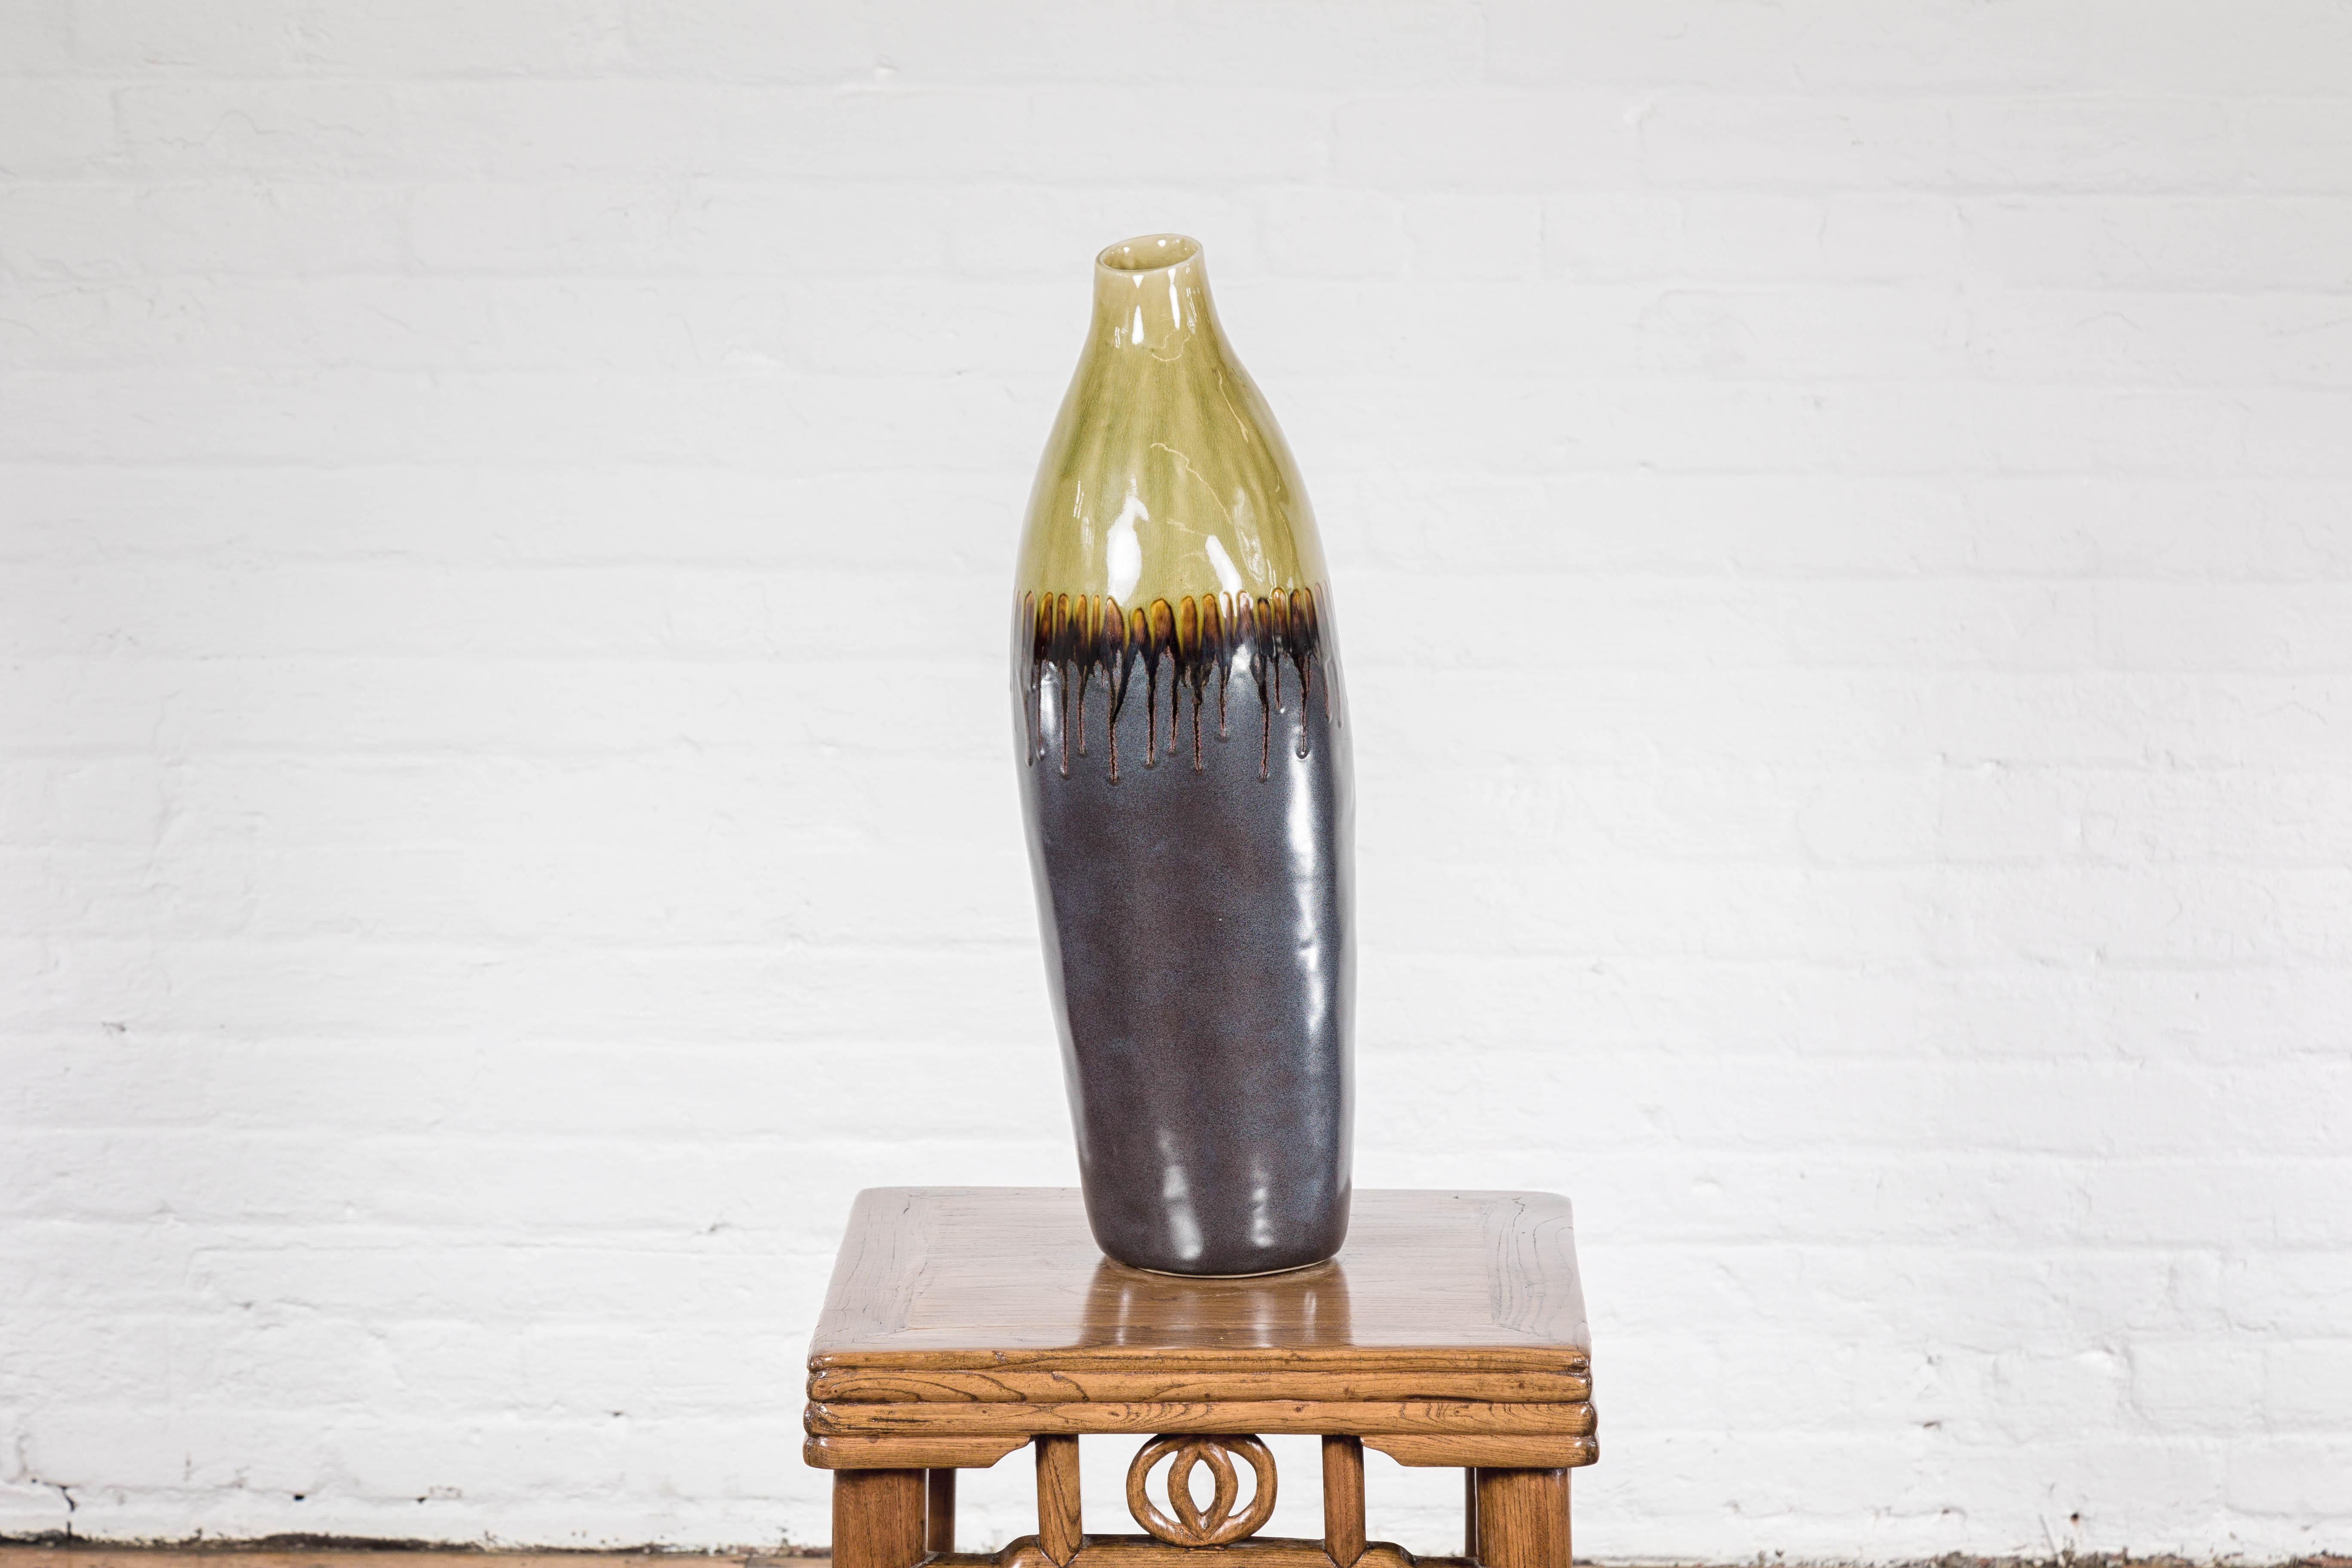 Handmade Artisan Ceramic Vase with Olive Green, Dark Grey and Brown Dripping In Good Condition For Sale In Yonkers, NY